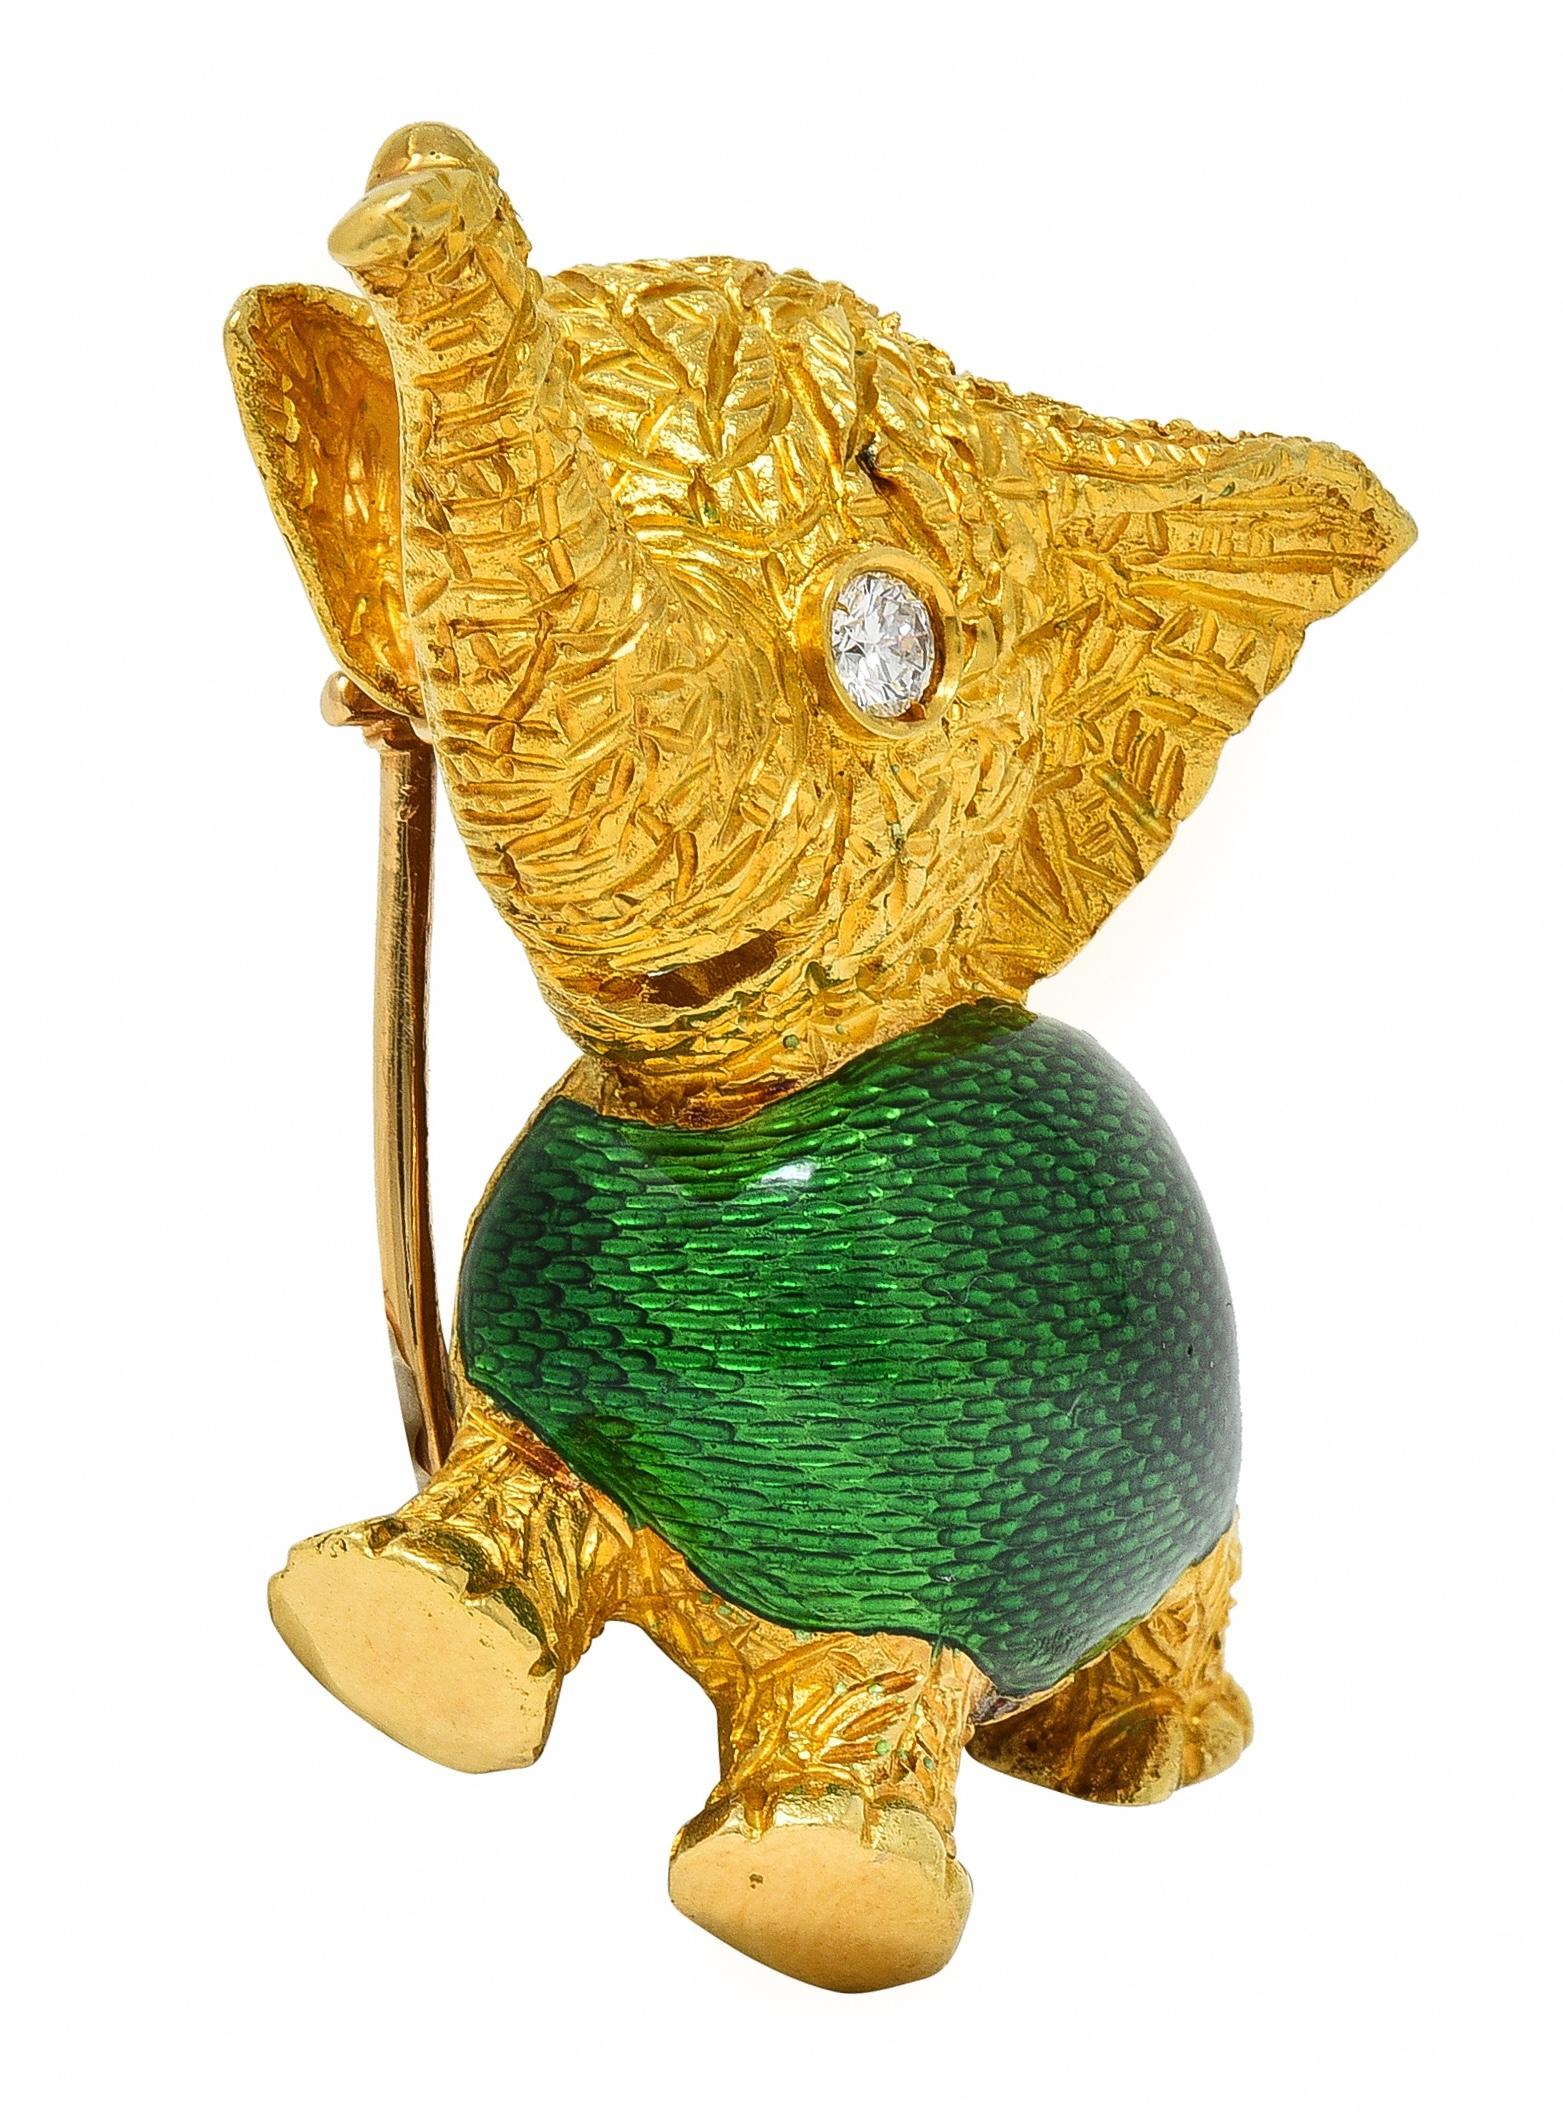 Designed as a cartoonish smiling elephant with textured skin 
With a basse-taille enamel body - transparent green
Glossed over an engraved linear texture 
Accented by a round brilliant cut diamond eye 
Weighing approximately 0.10 carat 
Eye clean